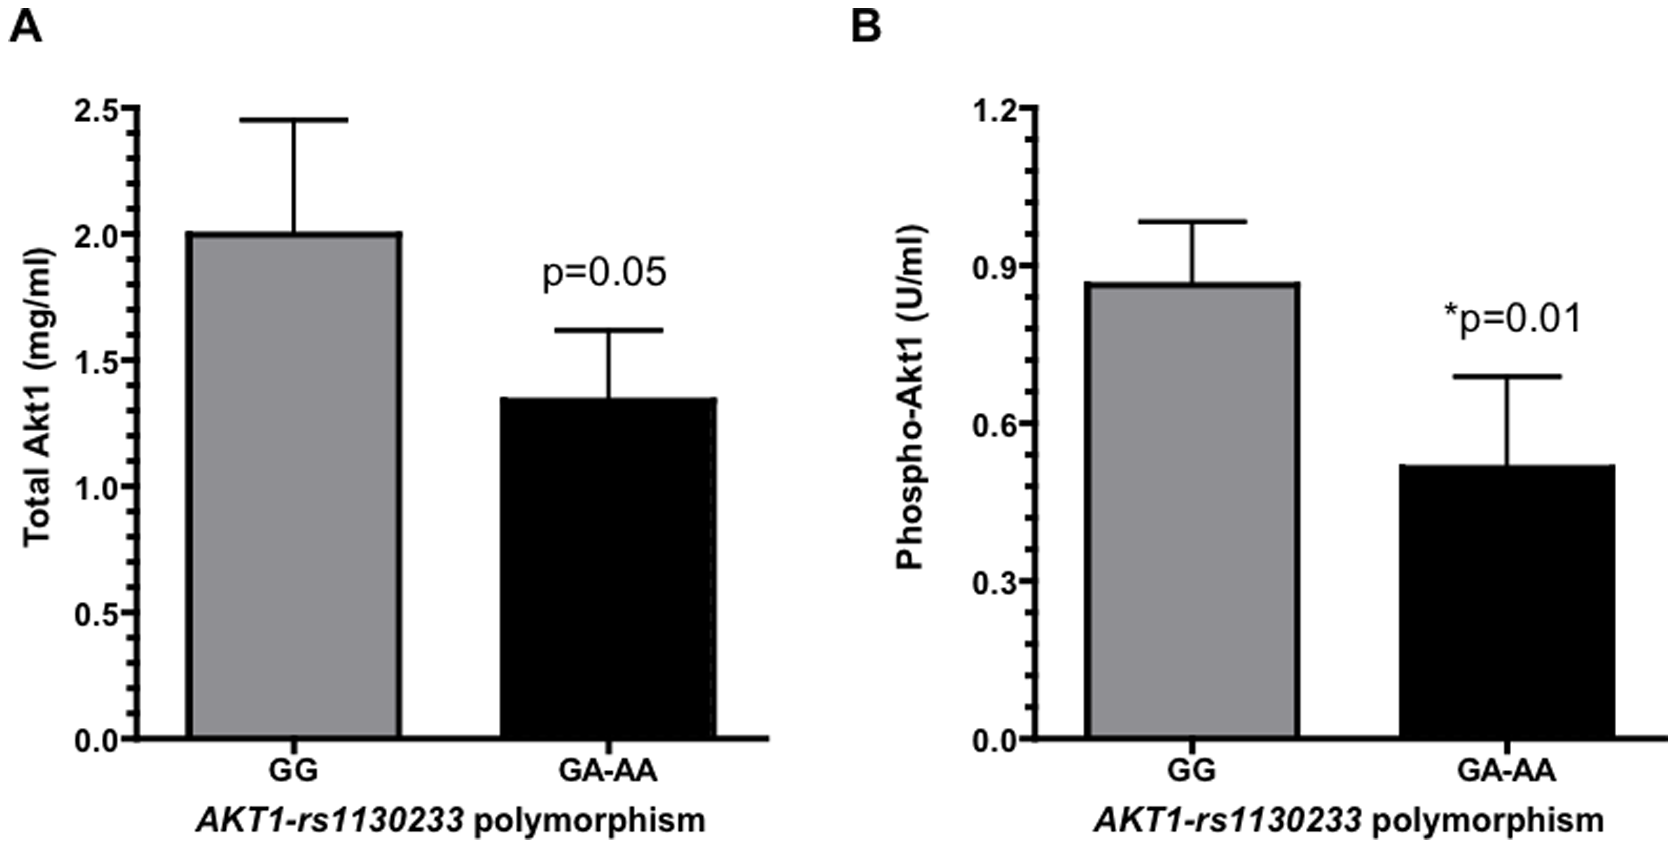 Akt1 expression in muscle samples according to the AKT1-rs1130233 polymorphism. Bar graphs illustrating the mean±SD expression of total Akt1 (A) and phospho-Akt1 (B) in muscle samples from patients with differential AKT1-rs1130233 genotypes (N = 9 samples in each group) *p<0.05.